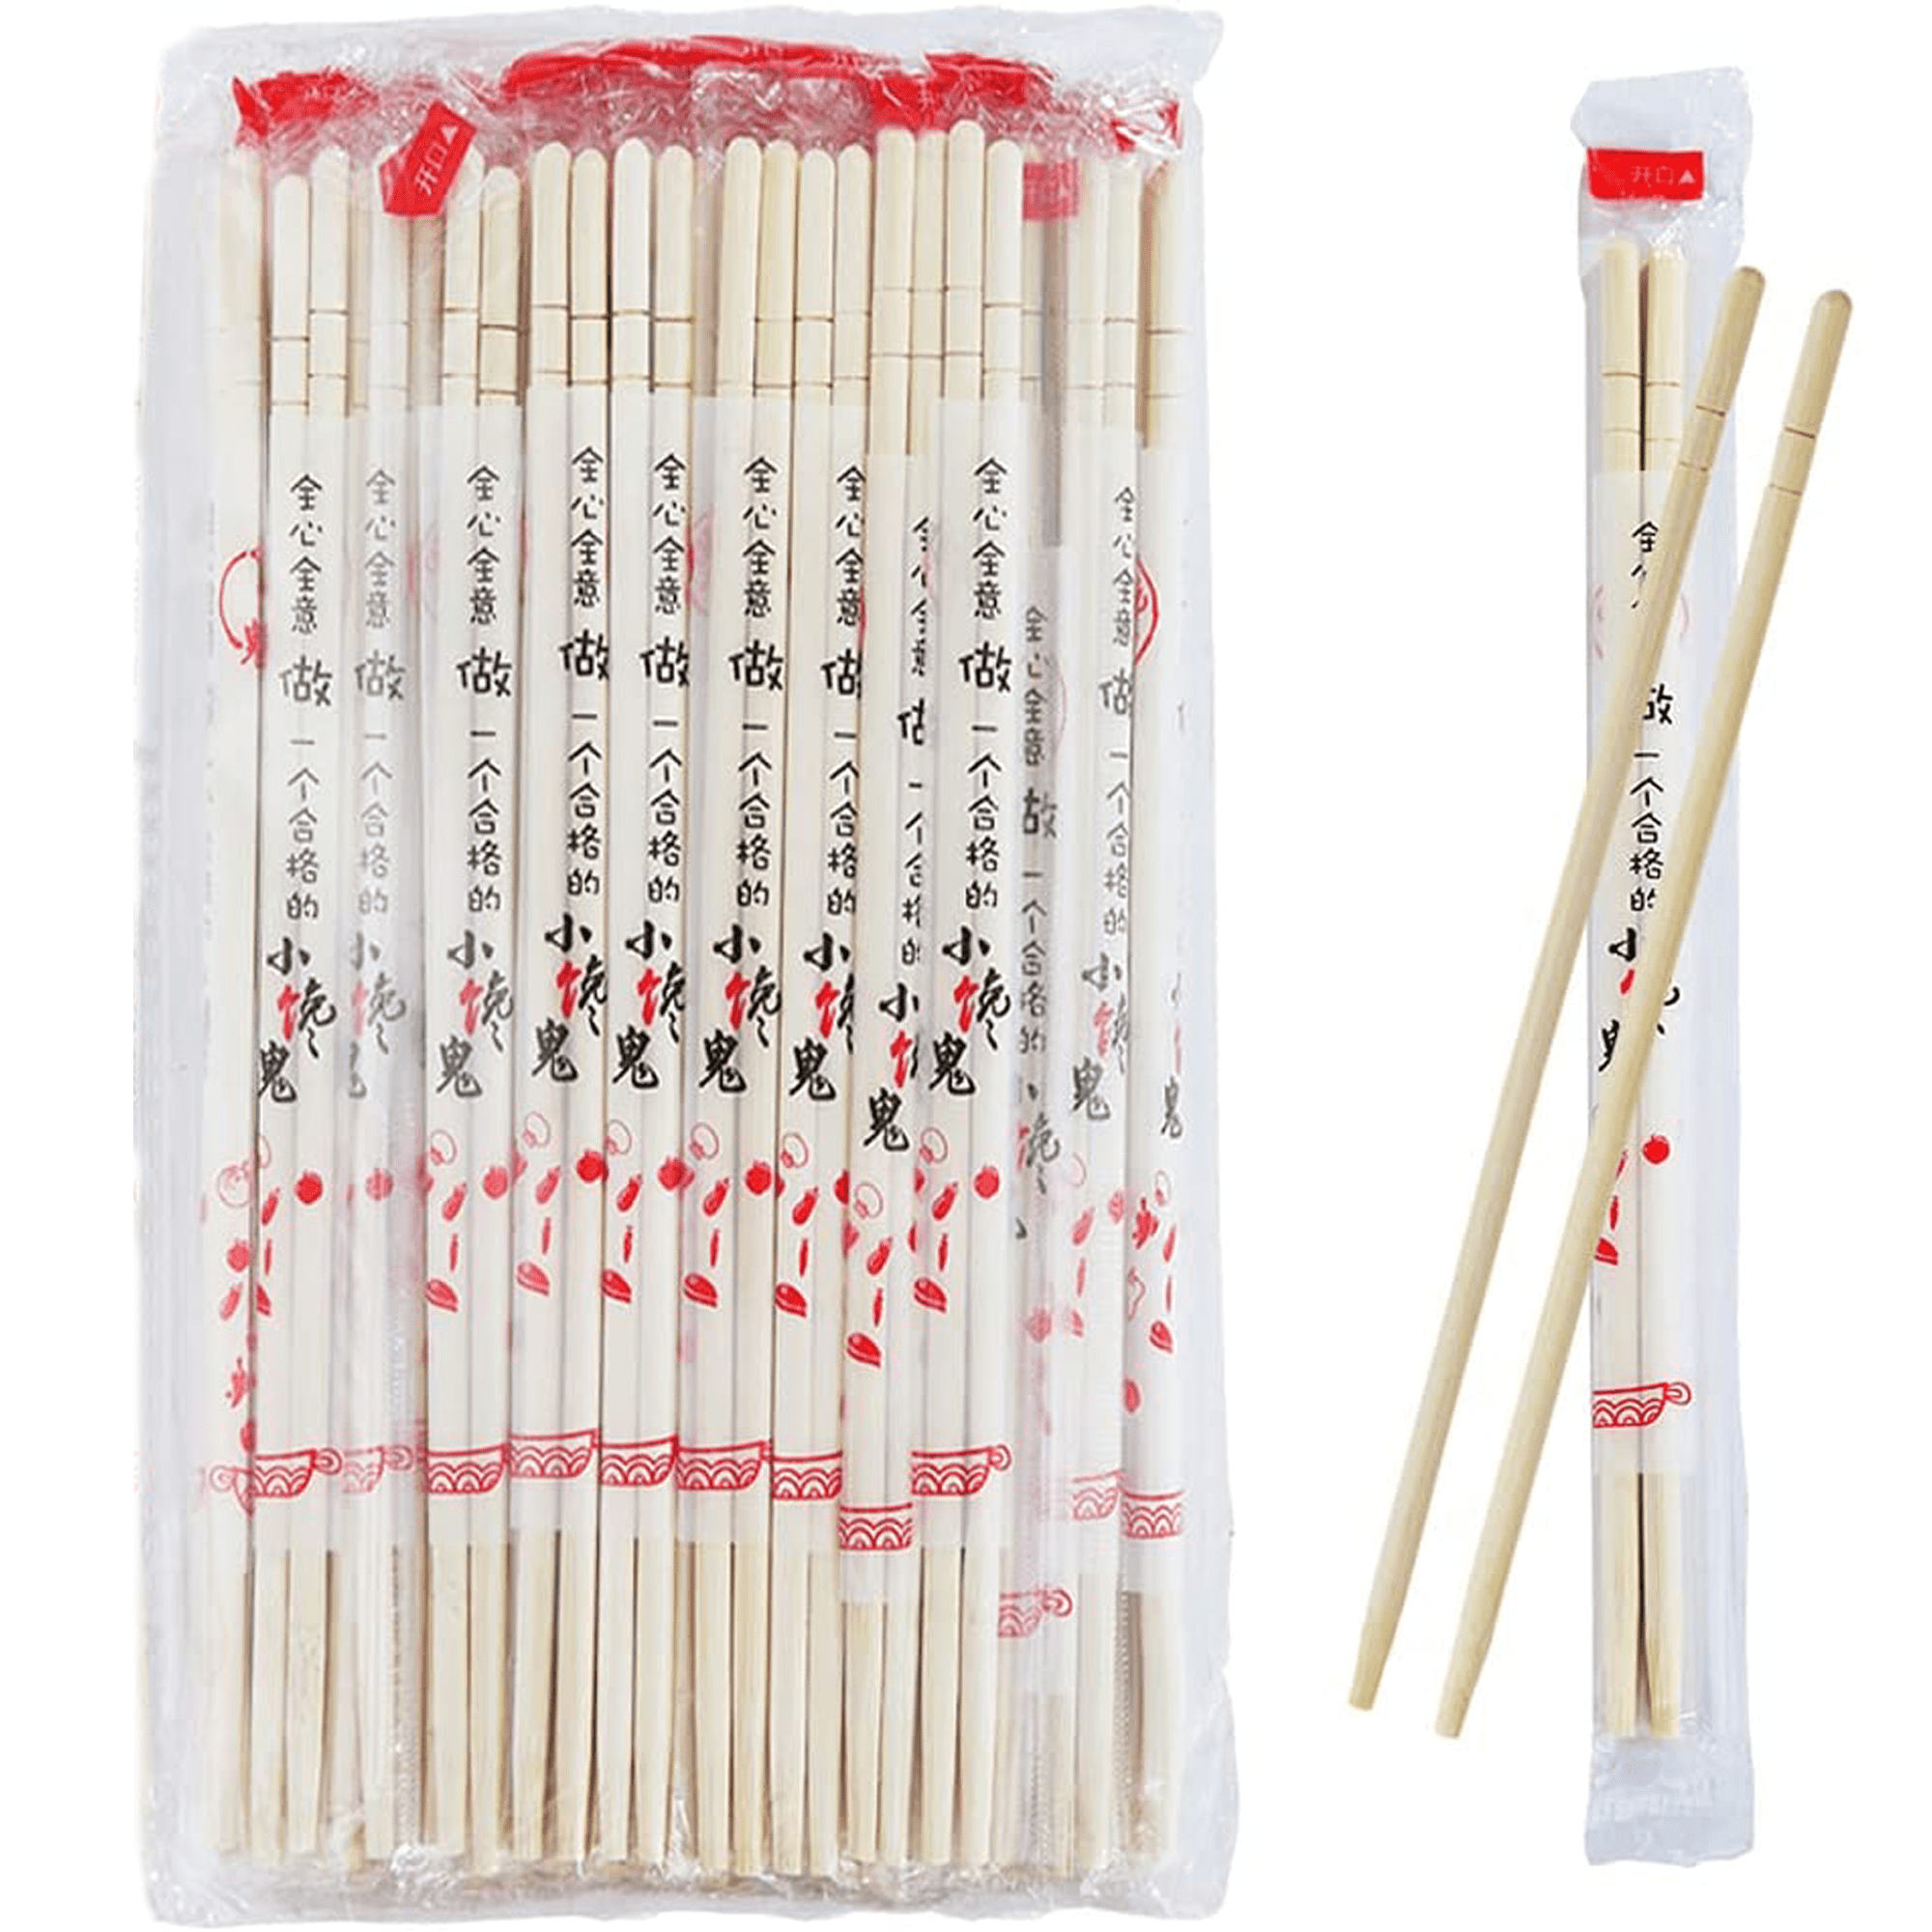 2-10-20-100 PAIRS WOODEN BAMBOO CHOPSTICKS CHINESE FOOD CHOP STICKS PARTY  NEW